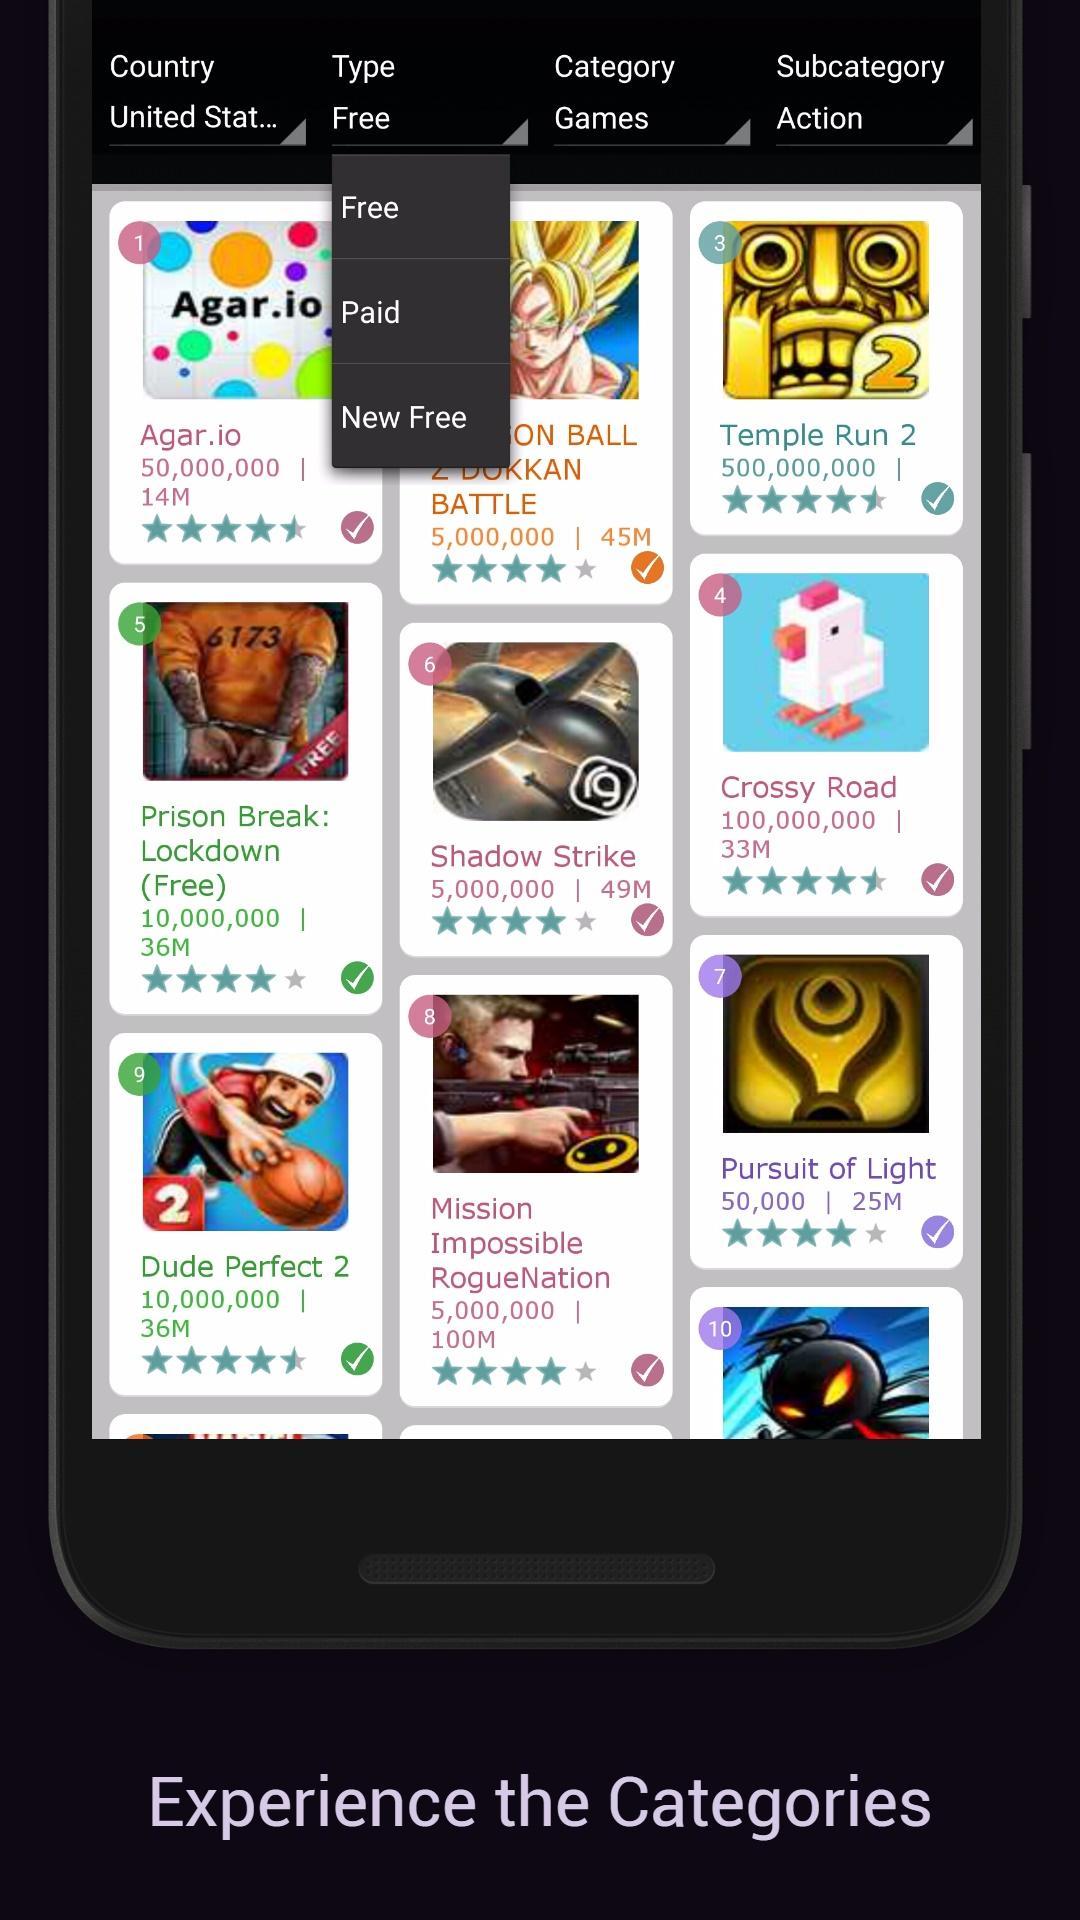 Mobo Market Free Download For Android 2.3